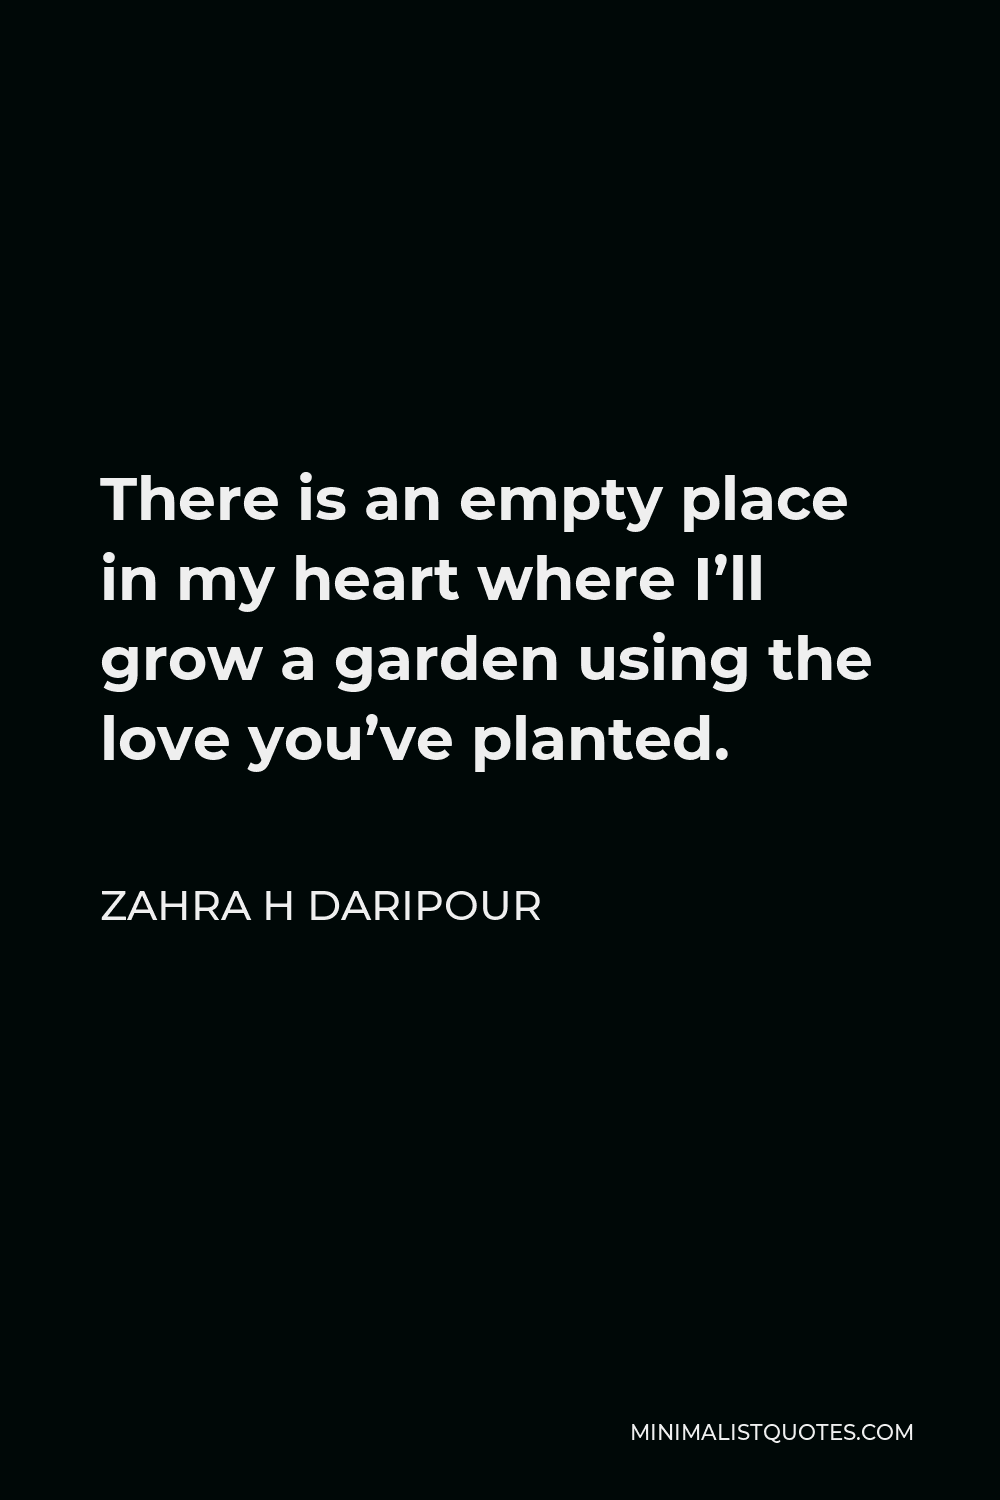 Zahra H Daripour Quote - There is an empty place in my heart where I’ll grow a garden using the love you’ve planted.